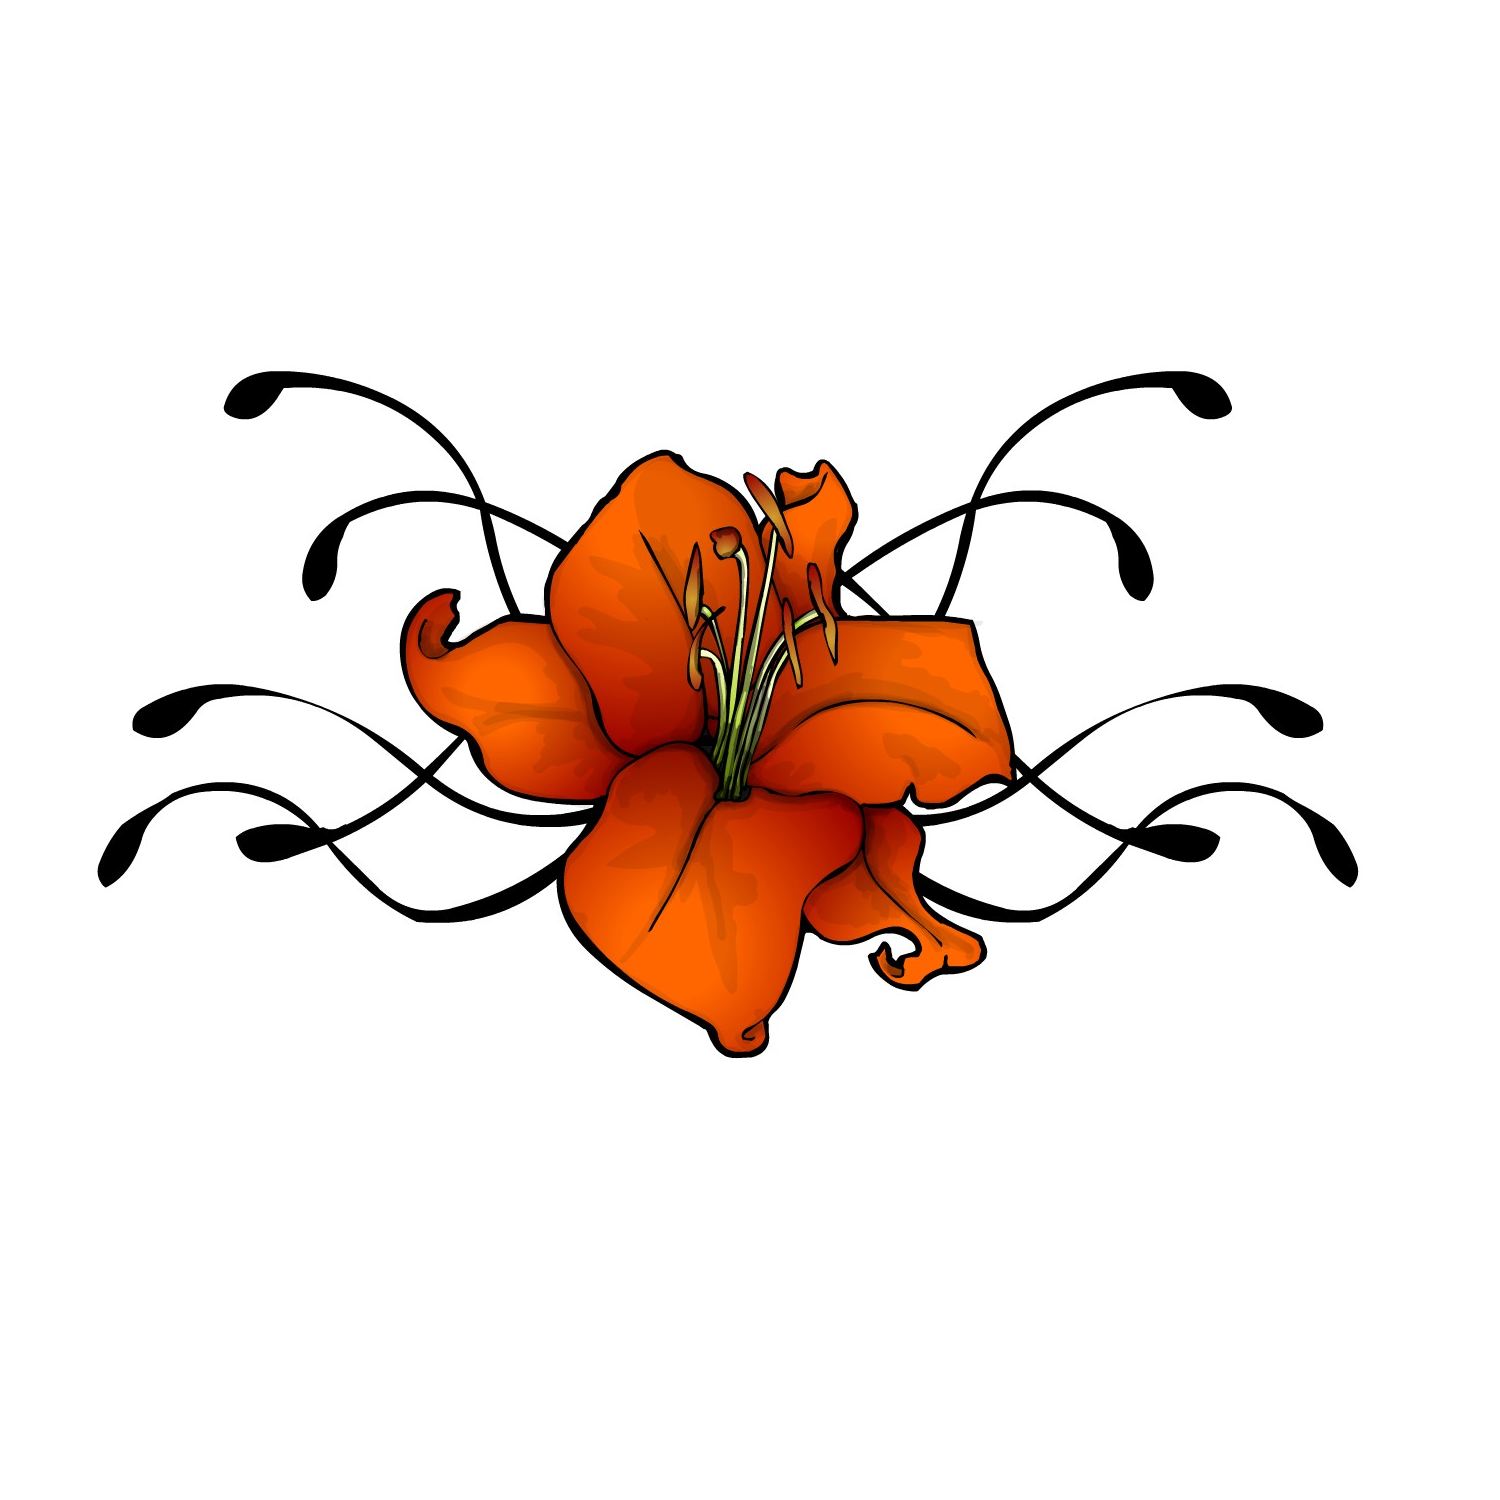 Tattoo Flower designs lily flowers tribal orange red and yellow white